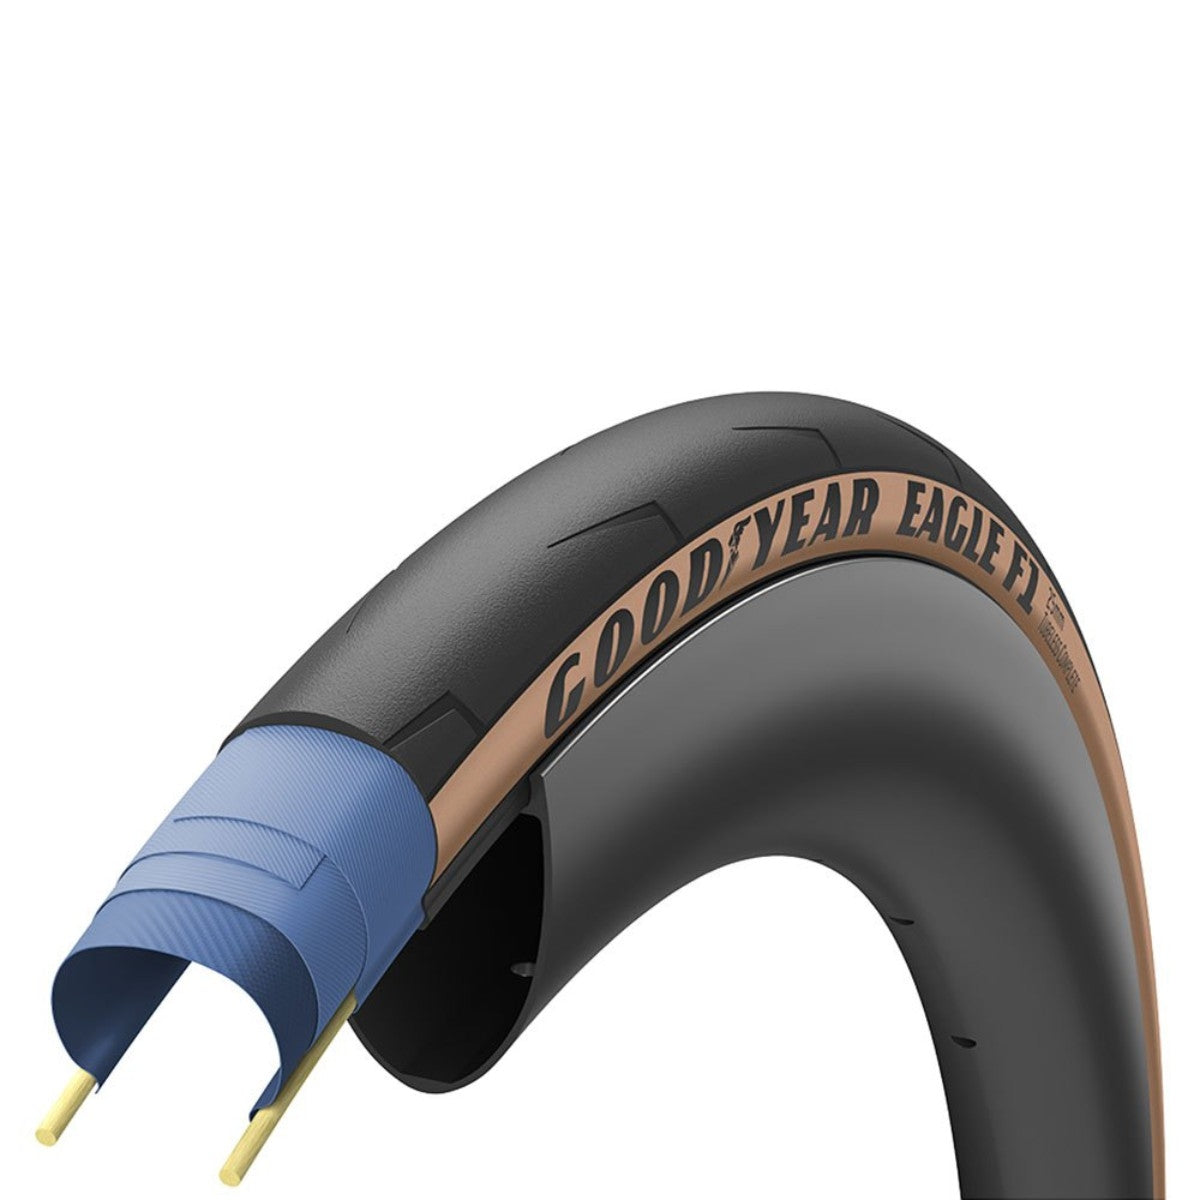 Good Year Eagle F1 Tubeless Complete clincher